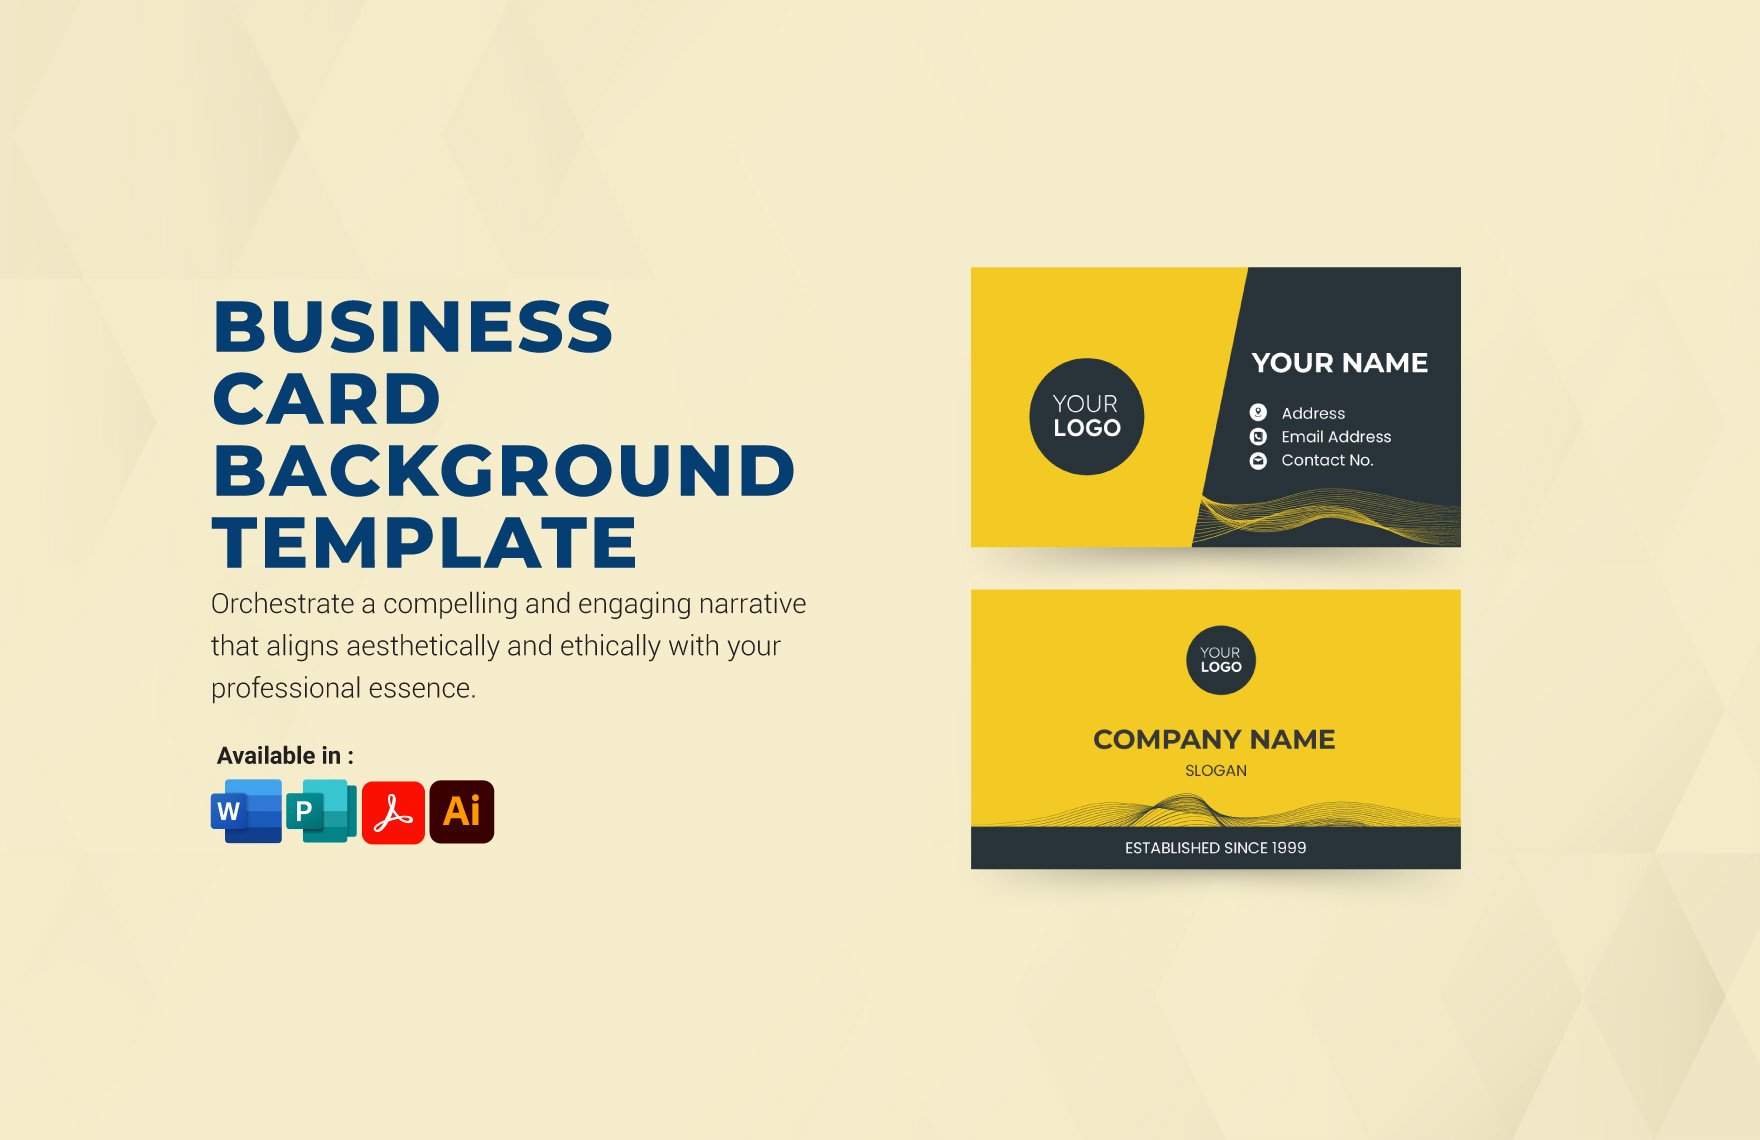 Business Card Background Template in Word, PDF, Illustrator, Publisher